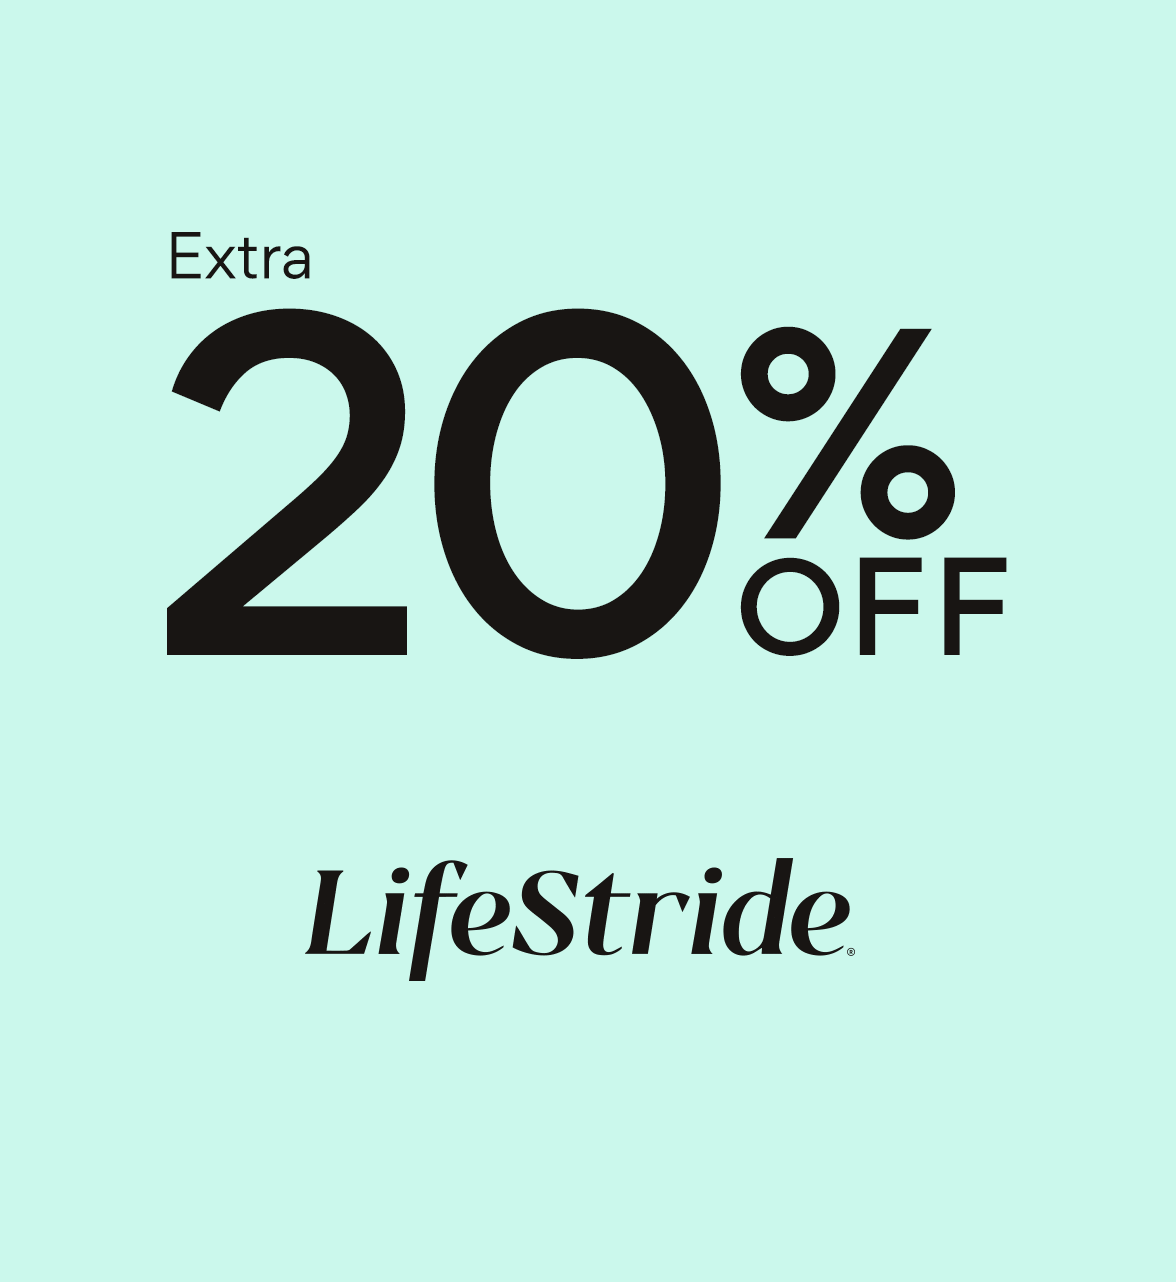 extra 20% off your favorite brands. exclusions apply